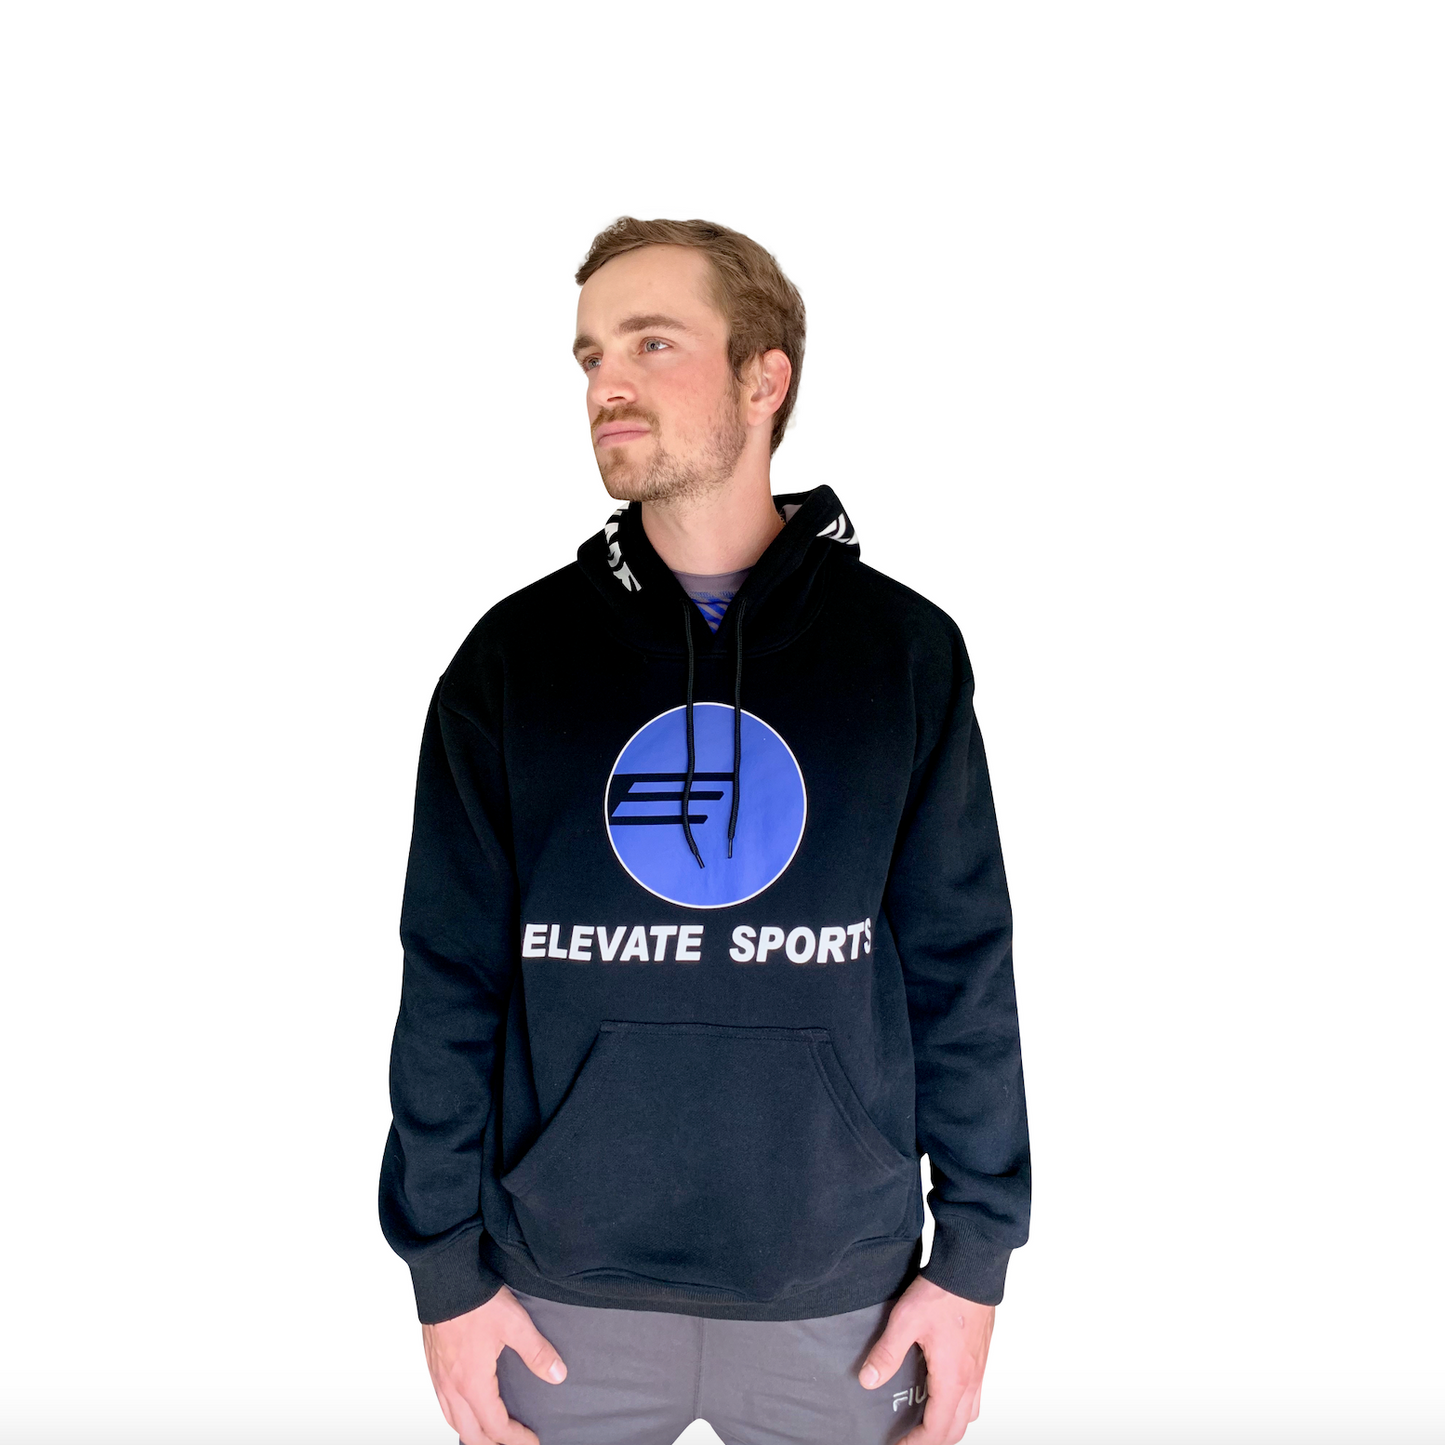 Lacrosse sweatshirt perfect for playing in or hanging in